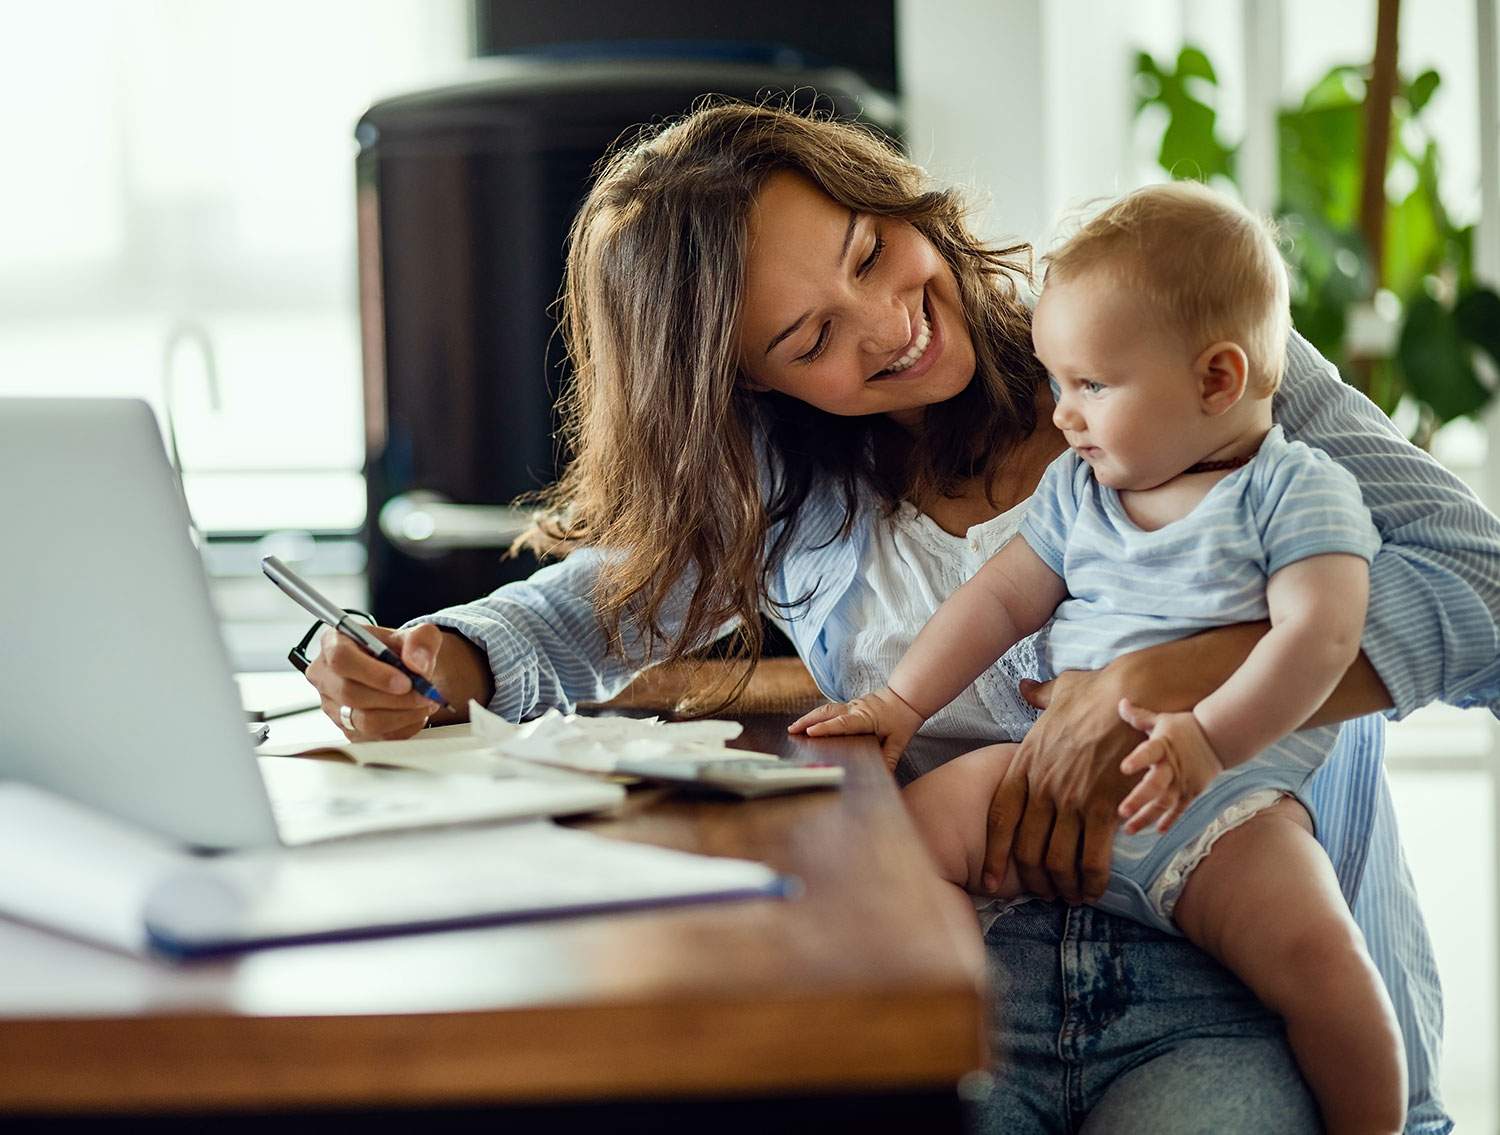 Mother at home with child - discover the best jobs for stay at home moms at Dream Vacations Advisor